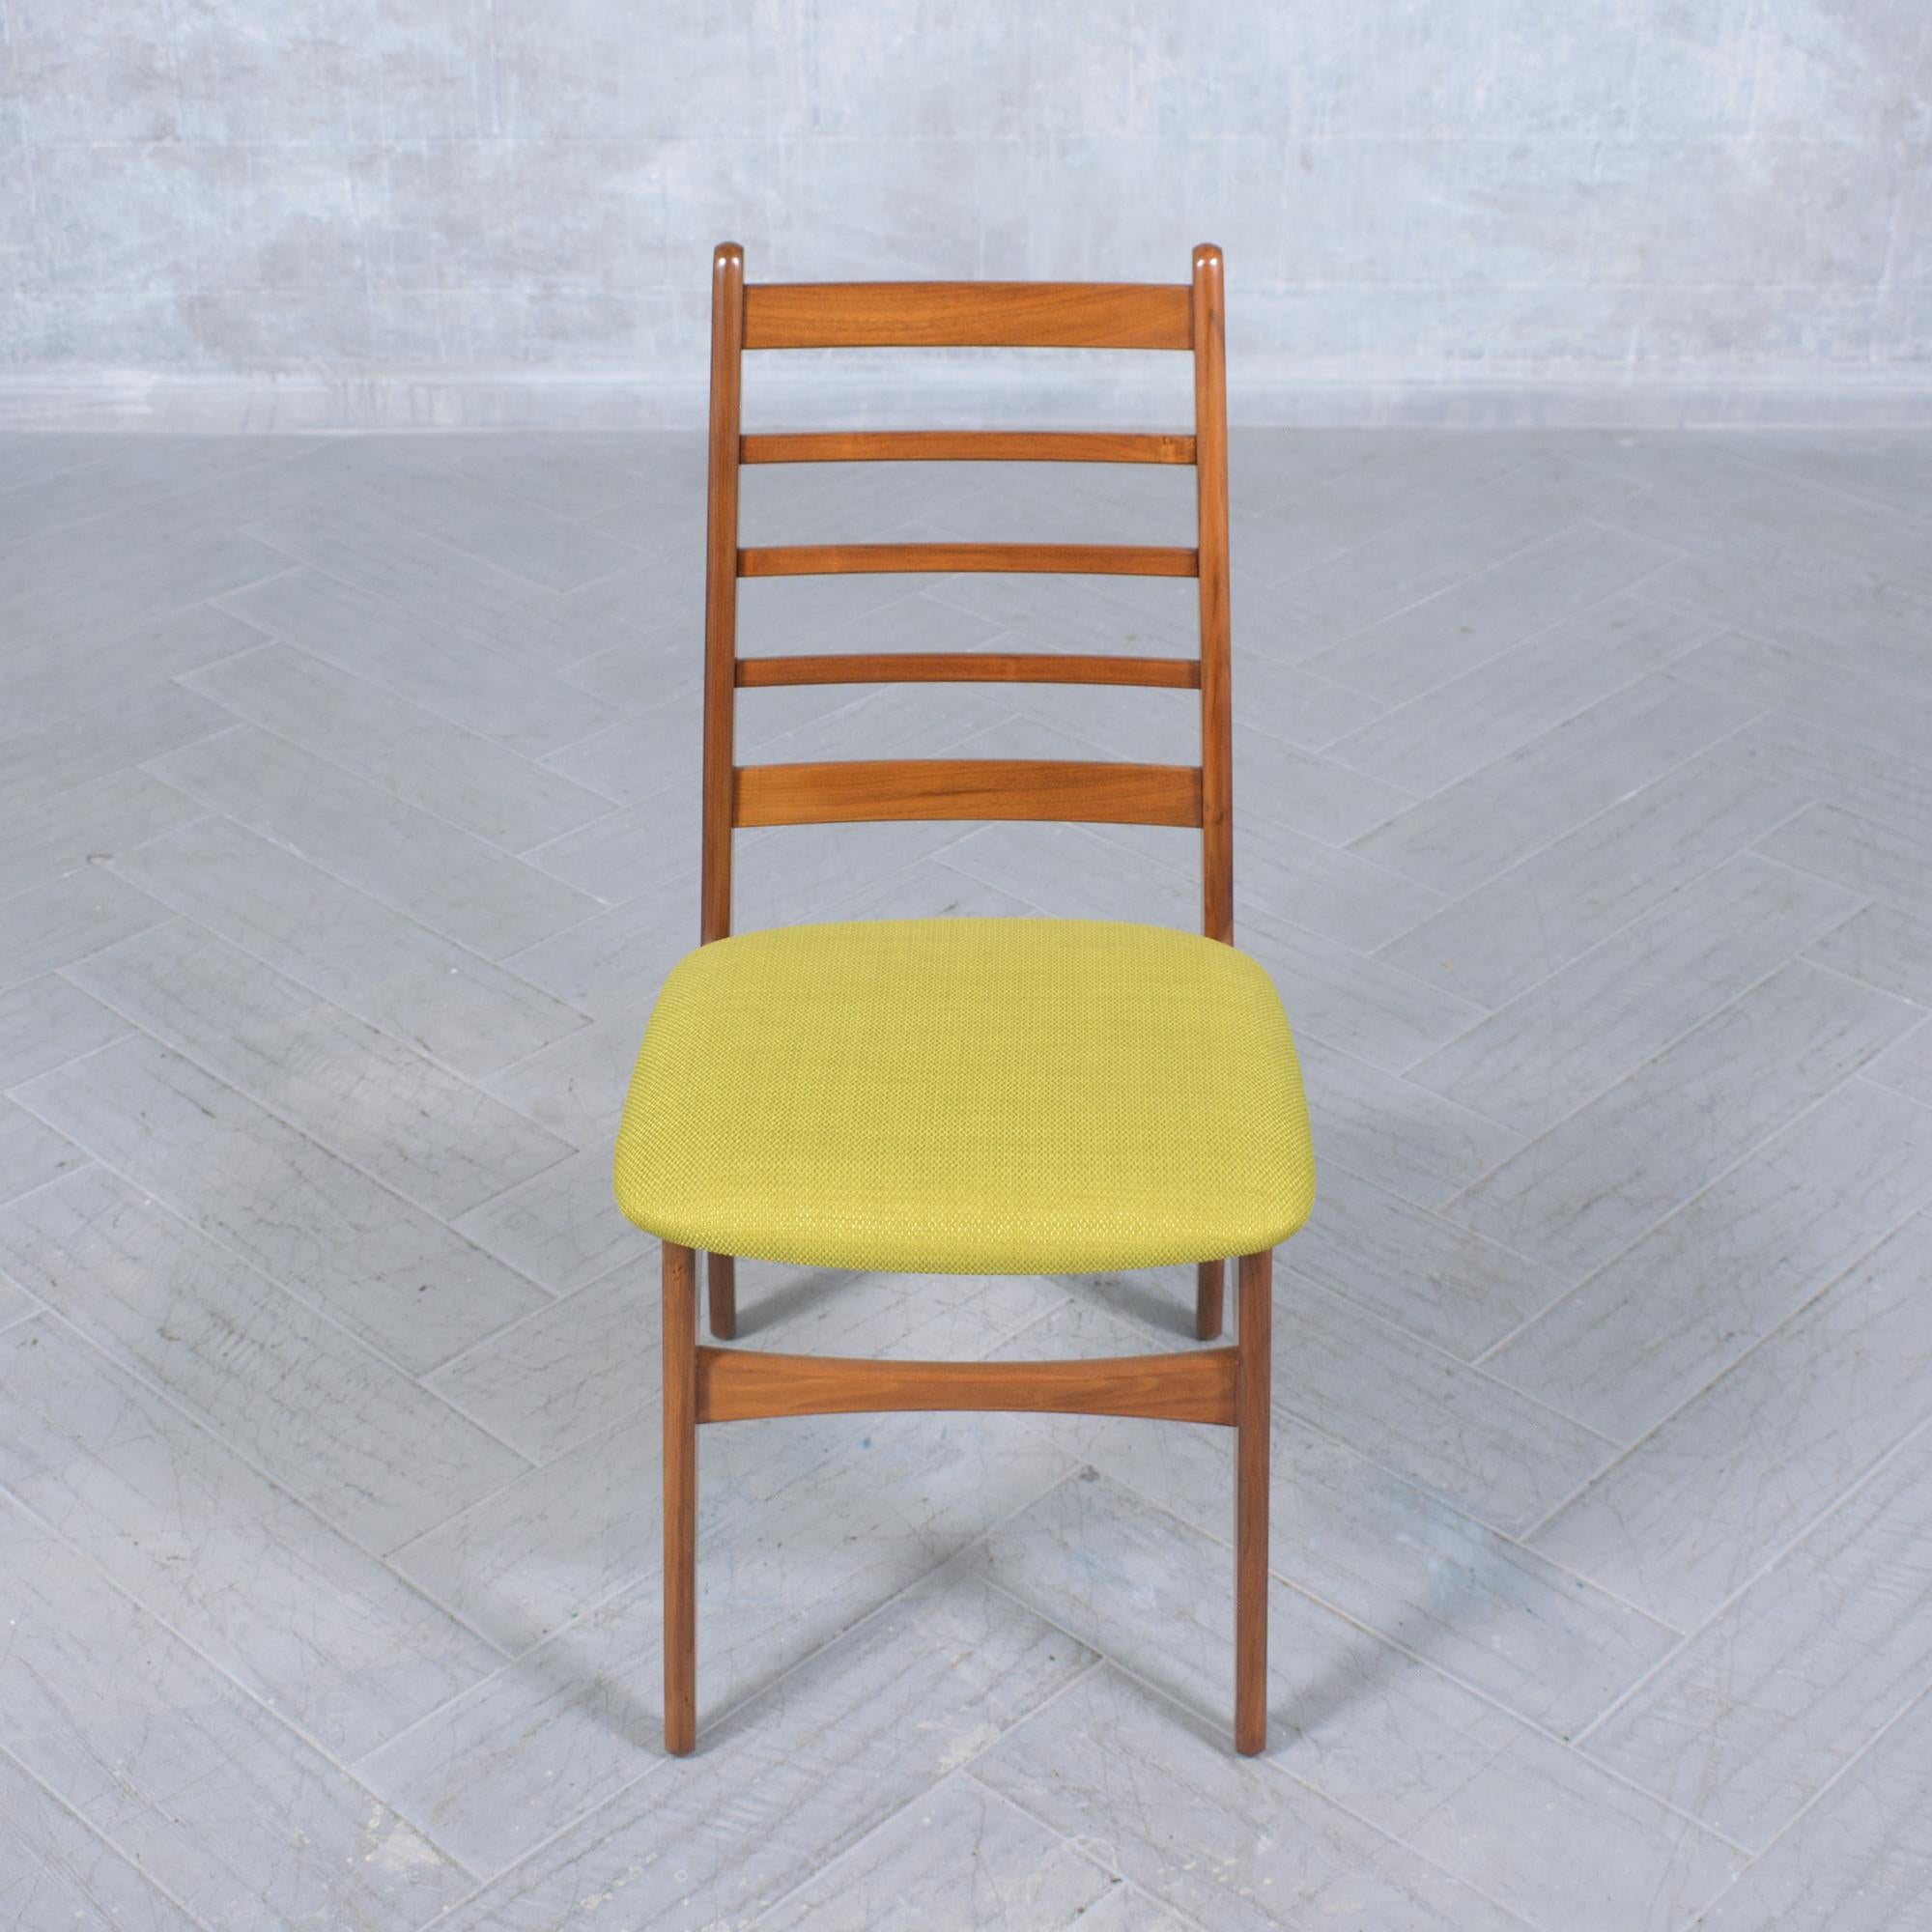 Step into the timeless world of Danish design with our beautifully restored 1960s Danish modern chair, a perfect representation of mid-century elegance and craftsmanship. Expertly handcrafted from teak wood, this chair has undergone a complete